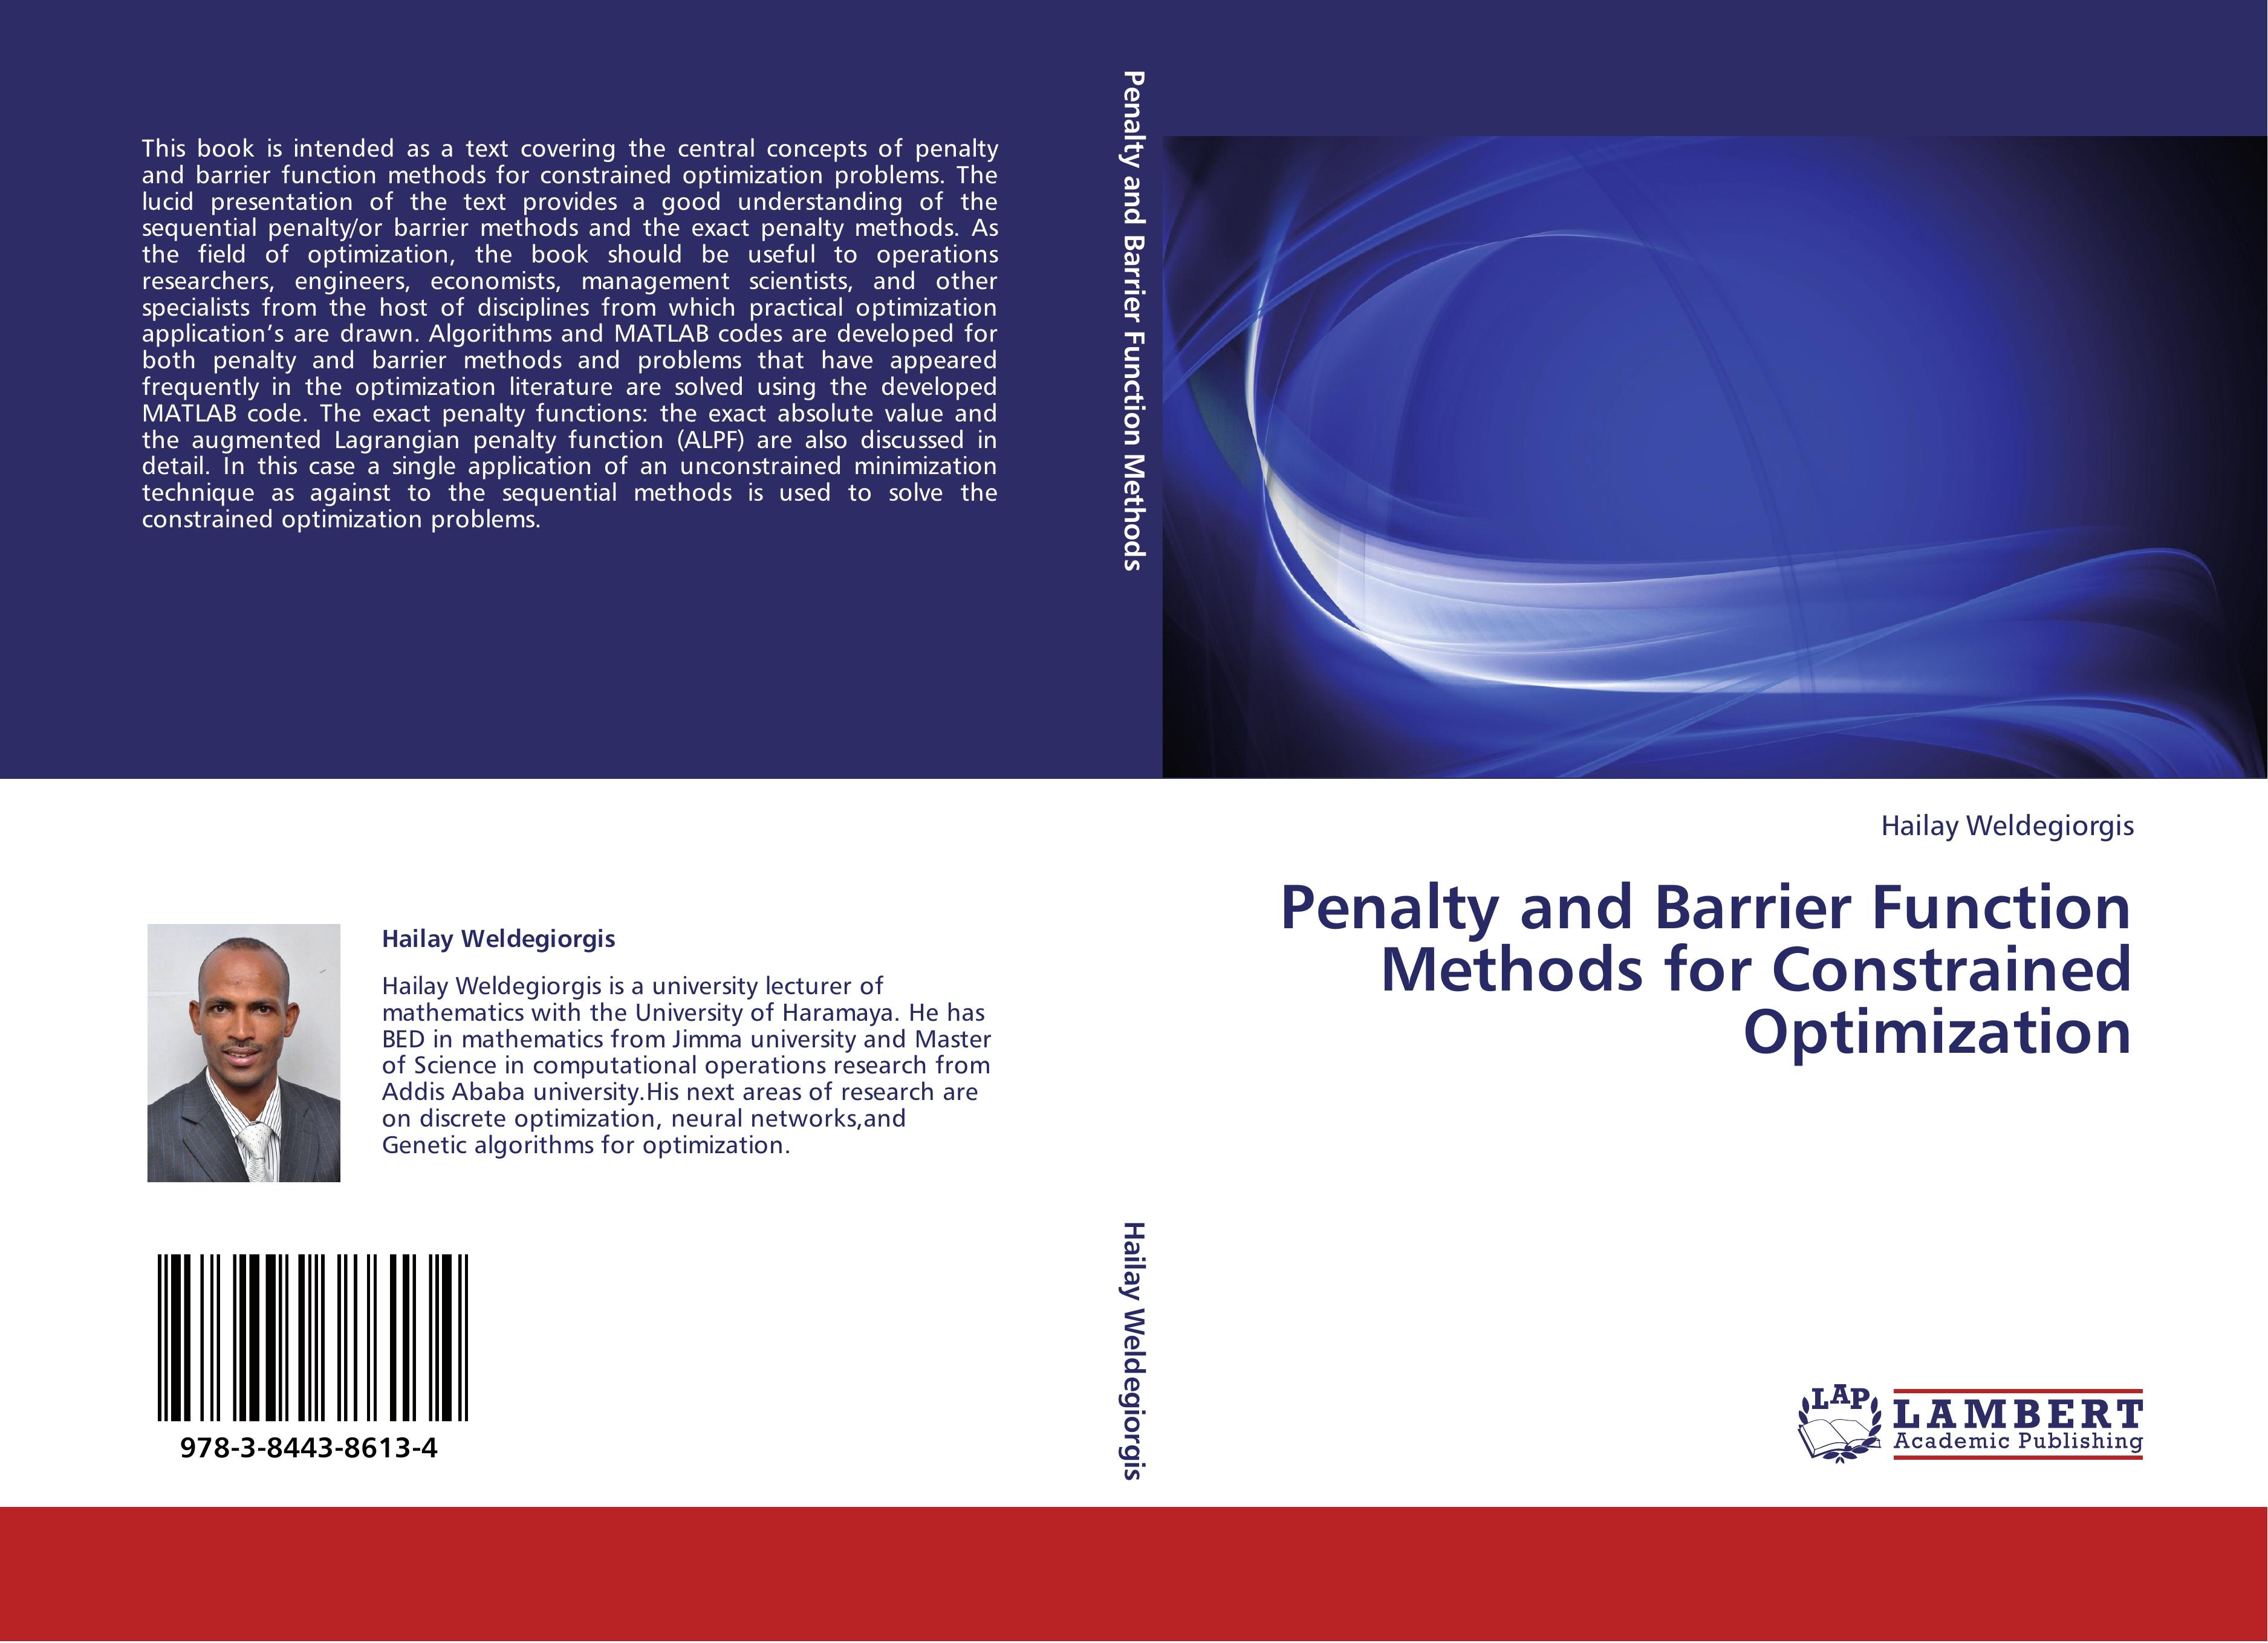 Penalty and Barrier Function Methods for Constrained Optimization - Hailay Weldegiorgis